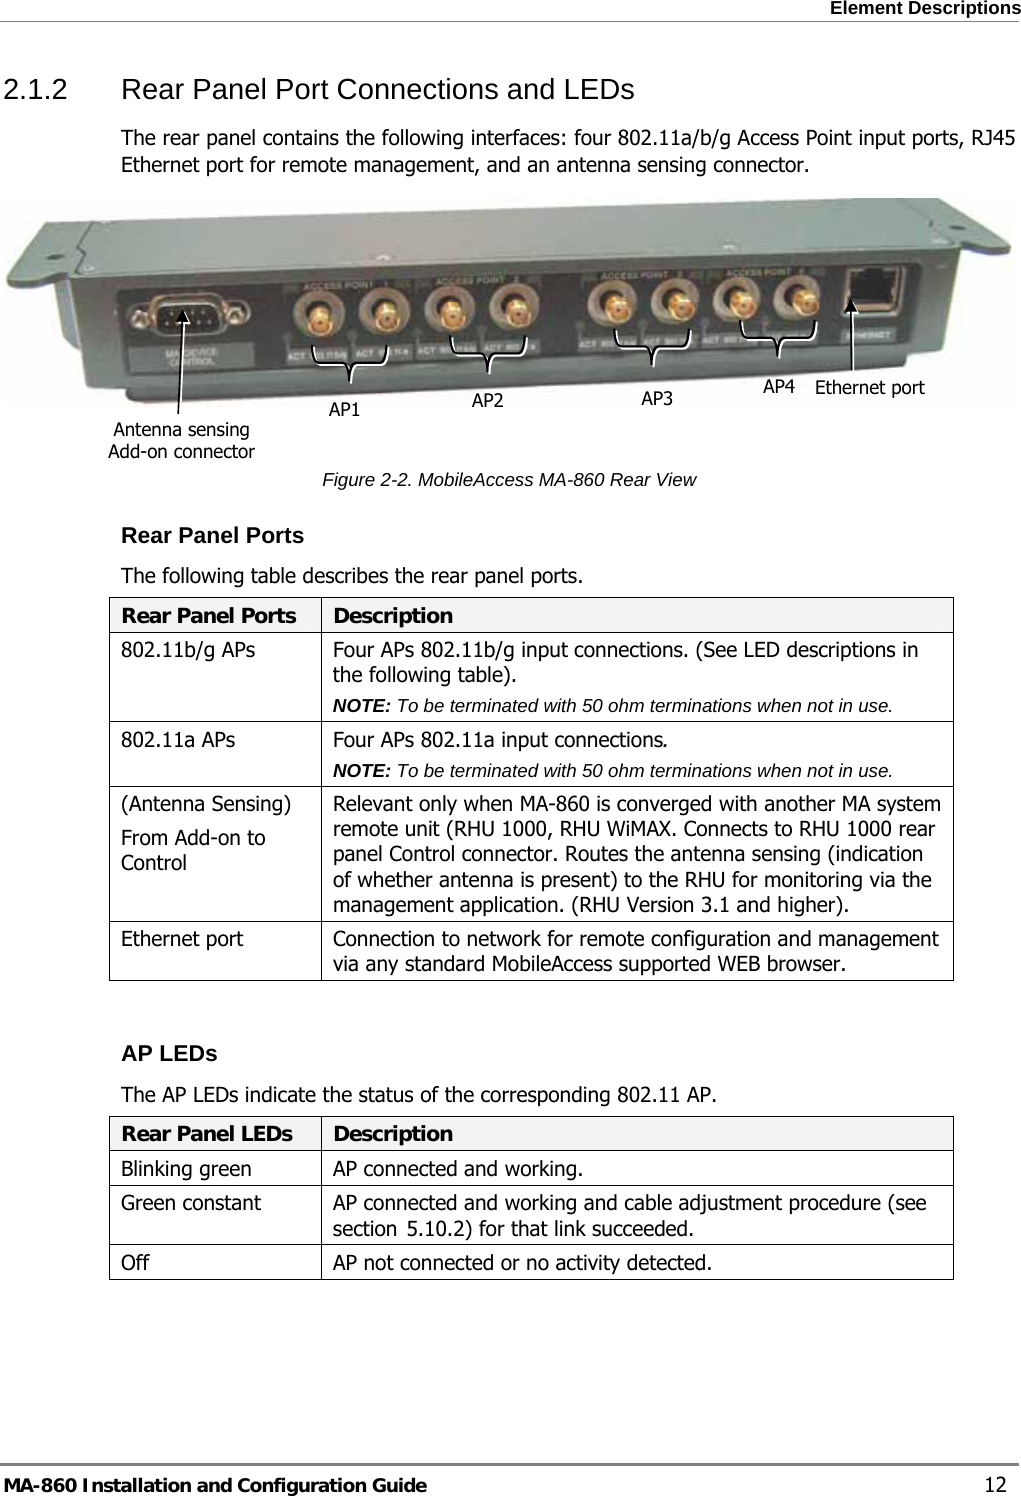  Element Descriptions 2.1.2  Rear Panel Port Connections and LEDs The rear panel contains the following interfaces: four 802.11a/b/g Access Point input ports, RJ45 Ethernet port for remote management, and an antenna sensing connector.   AP4  Ethernet portAP3AP2AP1 Antenna sensing Add-on connector   Figure  2-2. MobileAccess MA-860 Rear View Rear Panel Ports The following table describes the rear panel ports. Rear Panel Ports  Description 802.11b/g APs  Four APs 802.11b/g input connections. (See LED descriptions in the following table). NOTE: To be terminated with 50 ohm terminations when not in use.  802.11a APs  Four APs 802.11a input connections. NOTE: To be terminated with 50 ohm terminations when not in use. (Antenna Sensing) From Add-on to Control Relevant only when MA-860 is converged with another MA system remote unit (RHU 1000, RHU WiMAX. Connects to RHU 1000 rear panel Control connector. Routes the antenna sensing (indication of whether antenna is present) to the RHU for monitoring via the management application. (RHU Version 3.1 and higher). Ethernet port  Connection to network for remote configuration and management via any standard MobileAccess supported WEB browser.  AP LEDs The AP LEDs indicate the status of the corresponding 802.11 AP.  Rear Panel LEDs  Description Blinking green  AP connected and working. Green constant  AP connected and working and cable adjustment procedure (see section  5.10.2) for that link succeeded. Off  AP not connected or no activity detected.  MA-860 Installation and Configuration Guide    12 